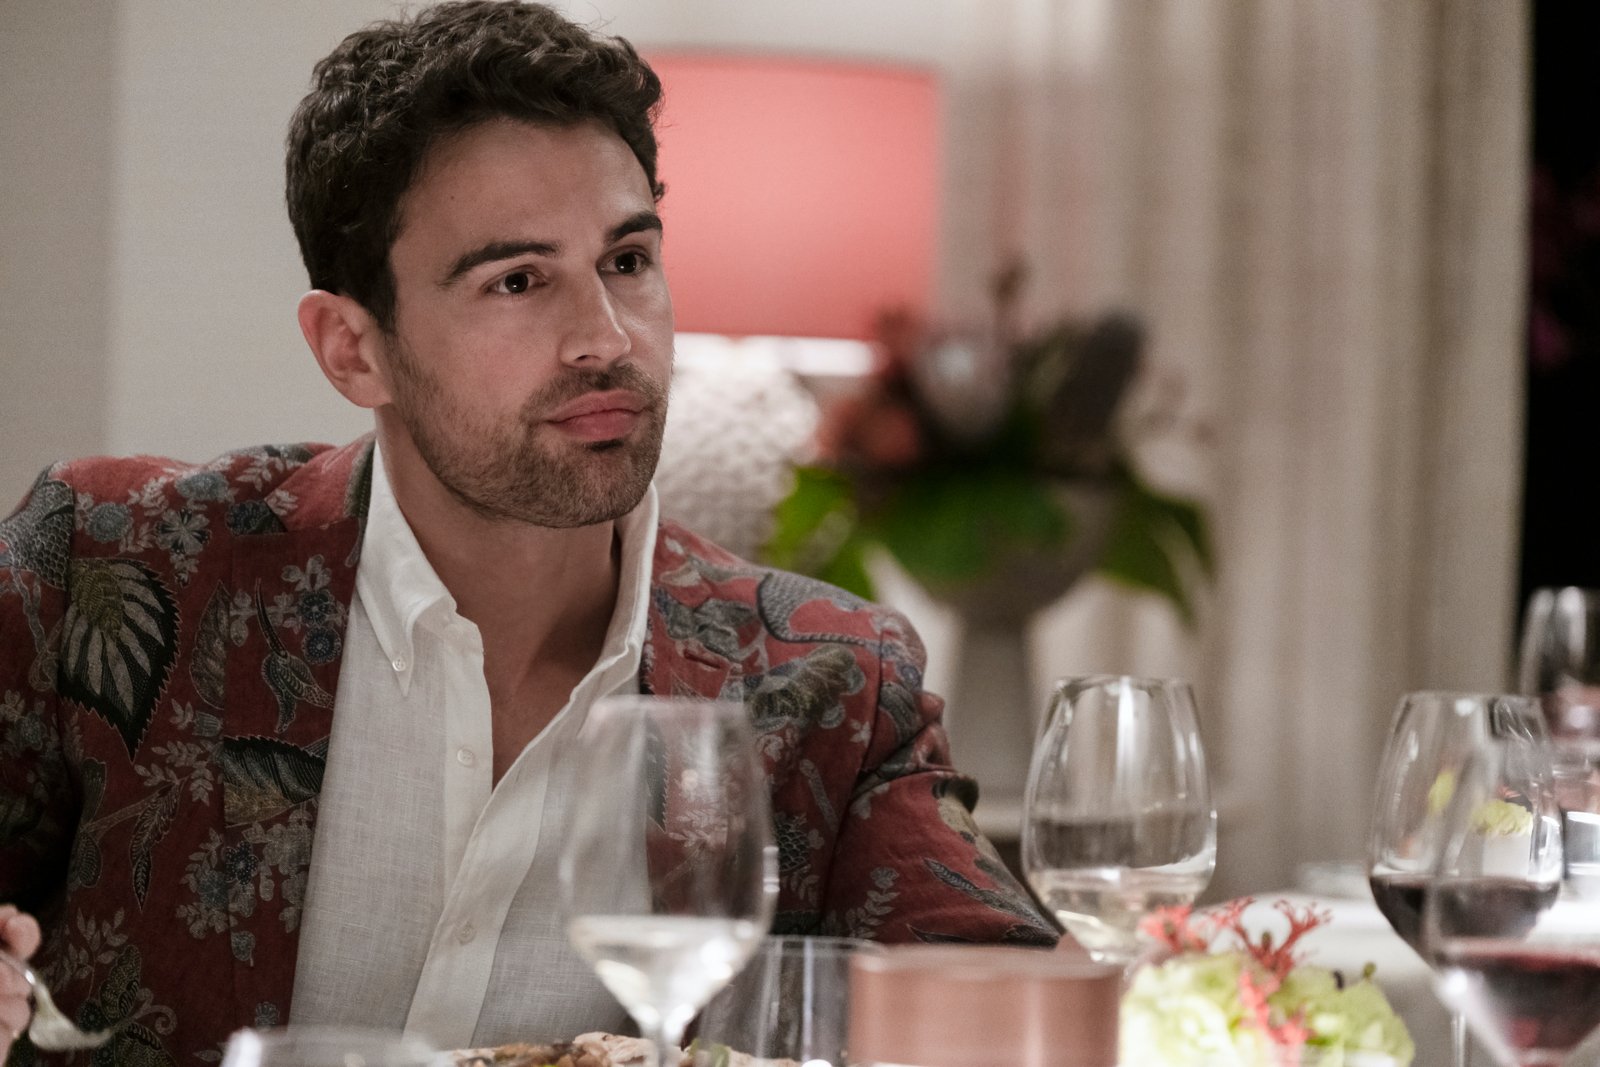 Theo James as Cameron in 'The White Lotus' Season 2. He's wearing a white shirt, red and green blazer, and sitting at a table.